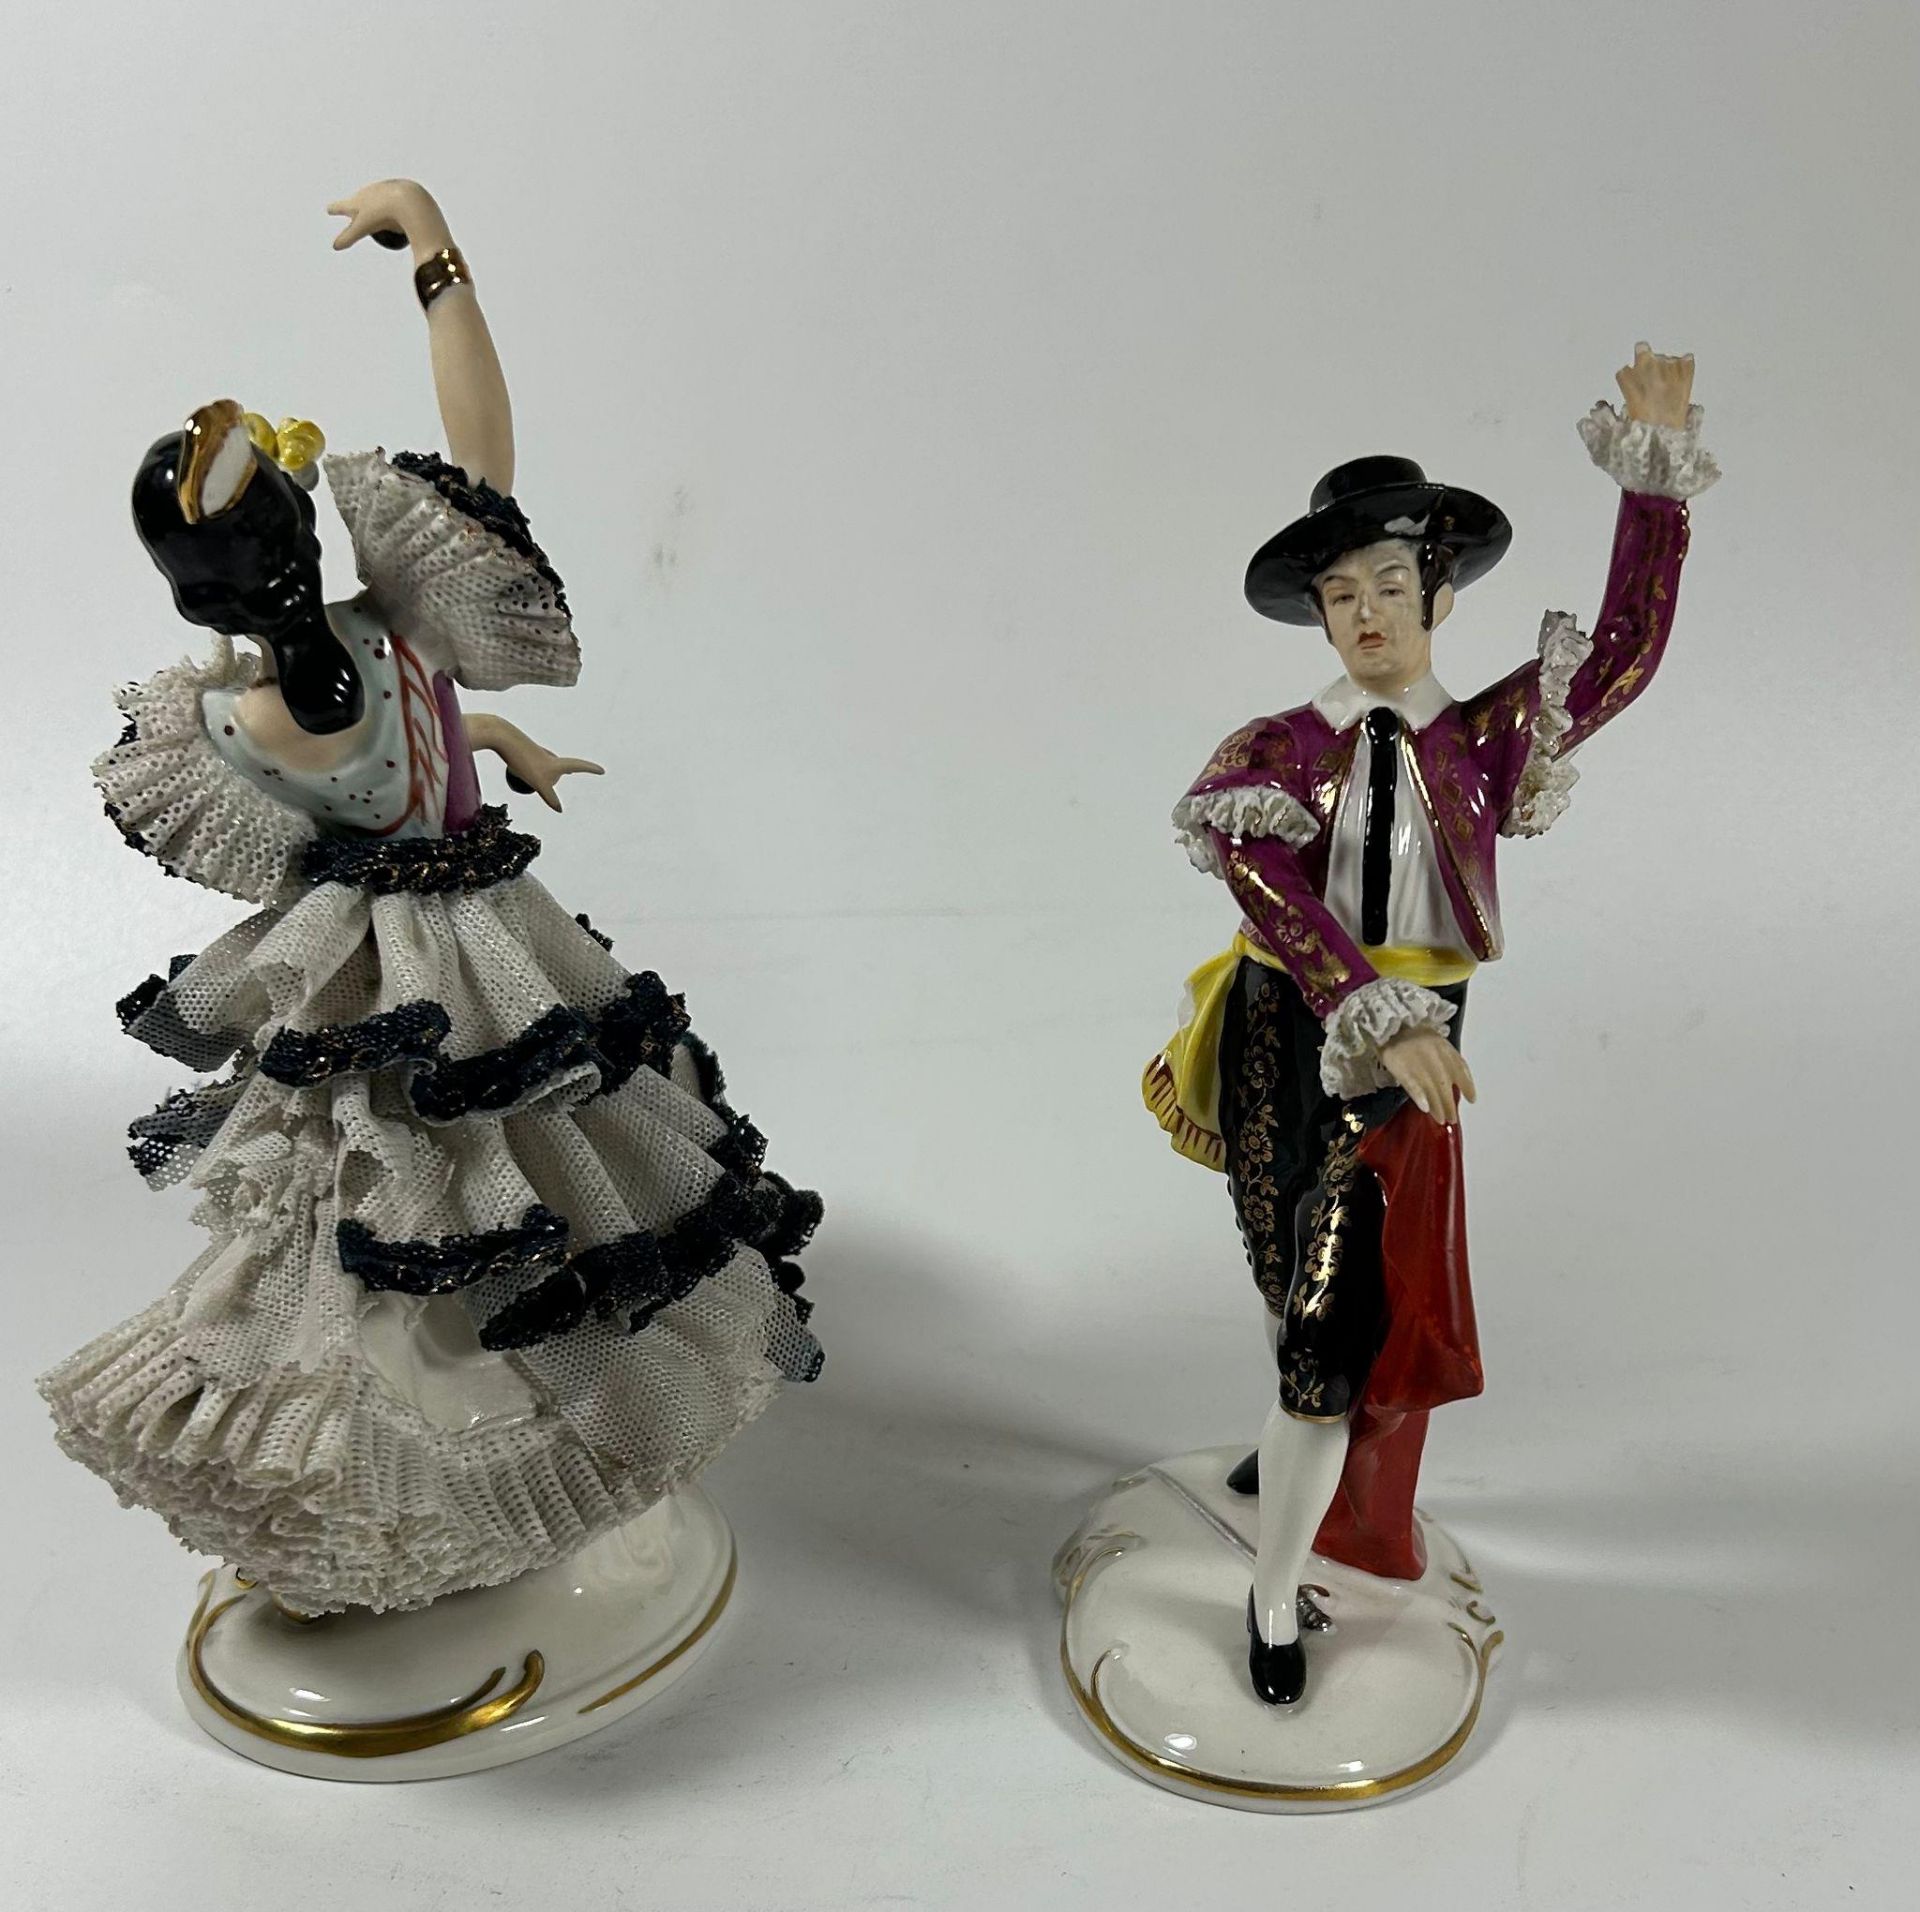 A PAIR OF VINTAGE ALKA DRESDEN LACE CONTINENTAL PORCELAIN FIGURES OF DANCERS - Image 2 of 3